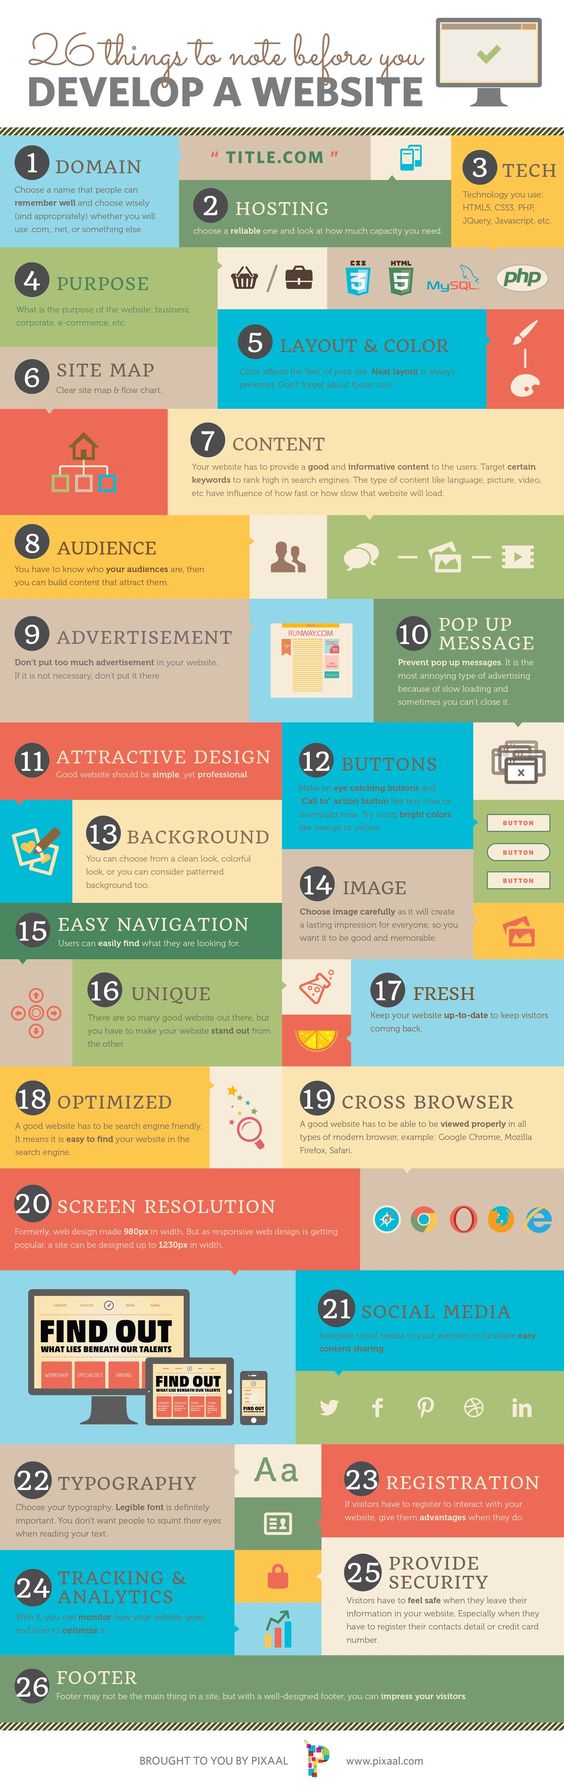 Infographic of 26 things you should keep in mind as you build a new site. I could quibble and there's no depth but as a colorful checklist, it's pretty well done.